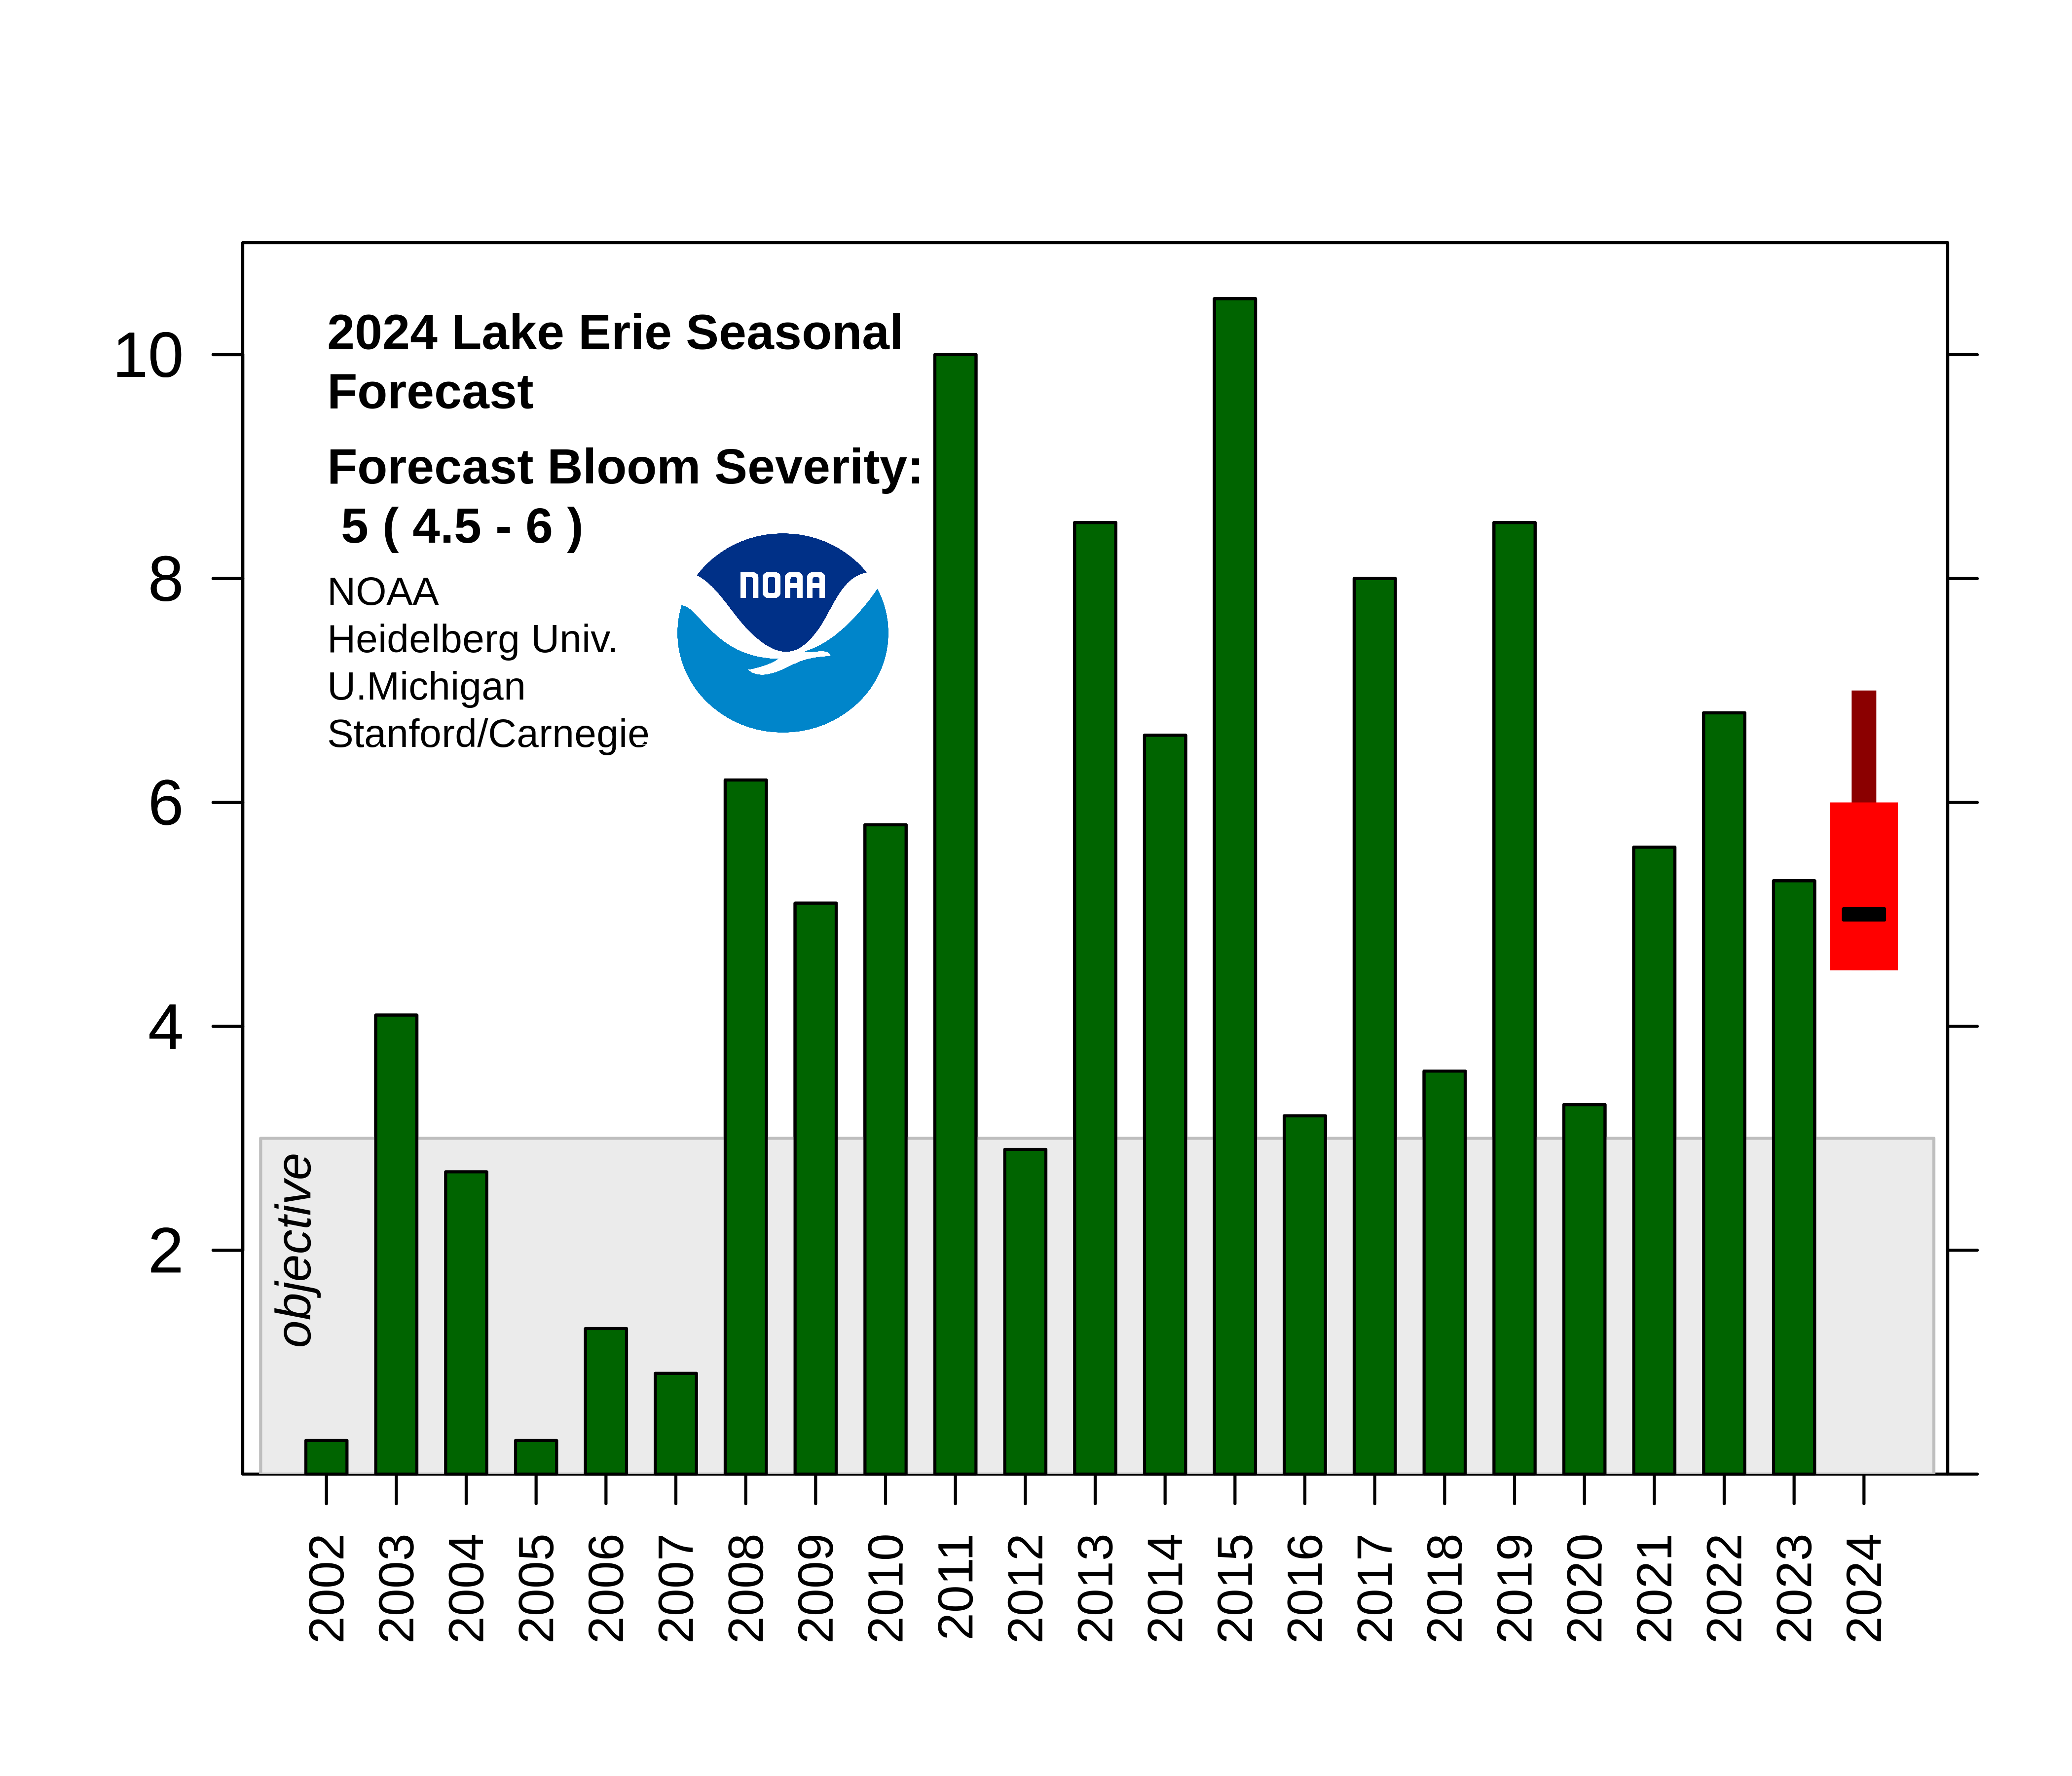 A bar chart showing the 2024 Lake Erie seasonal forecast bloom severity forecast (shown as a red bar) compared to previous years (2022-2023 show by green bars). Severity level on Y axis and years on x axis. The 2024 severity forecast ranges from 4.5-6, while a severity below 3 is the goal of the Great Lakes Water Quality Agreement (GLWQA). Credit: NOAA NCCOS.